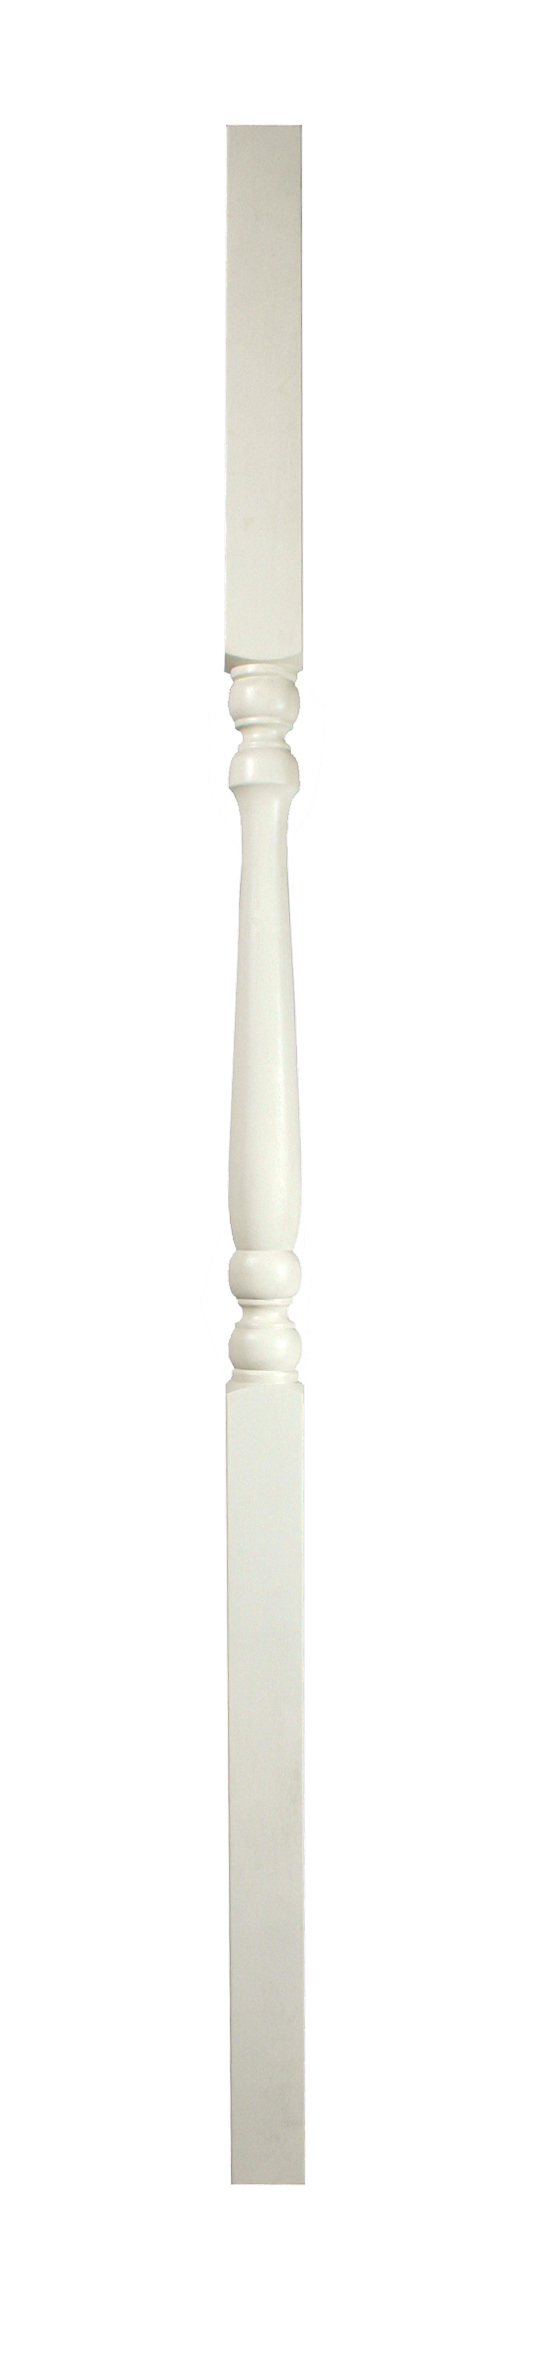 1 Smooth Primed Colonial Spindle 1100 41